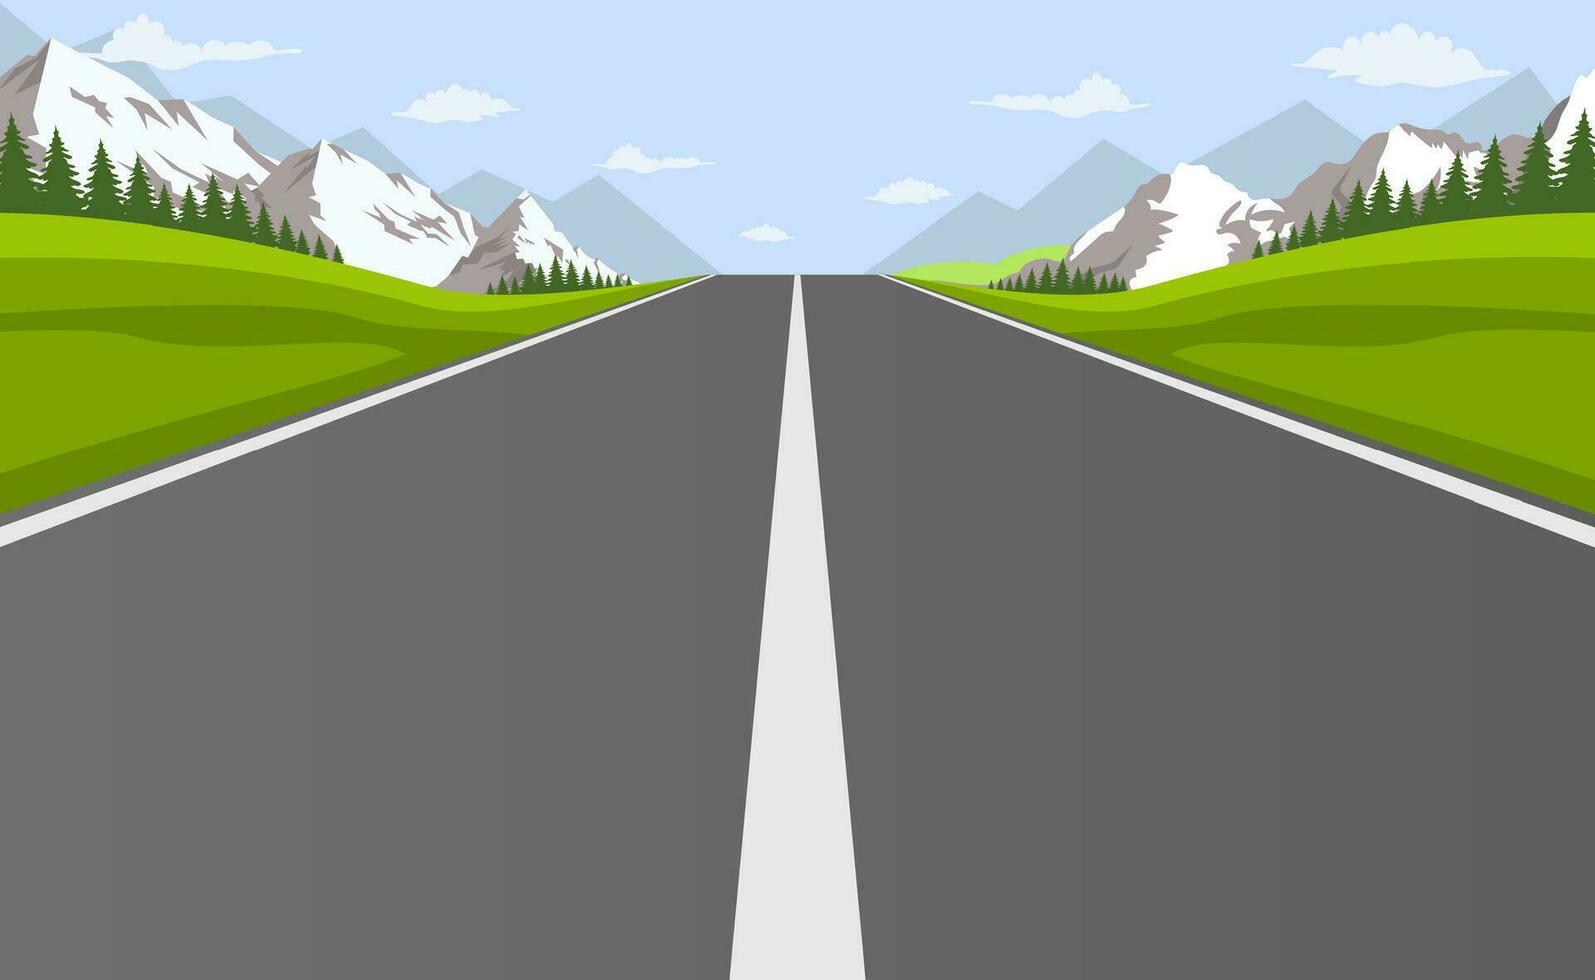 highway drive with beautiful landscape. Travel road car view. vector illustration in flat design